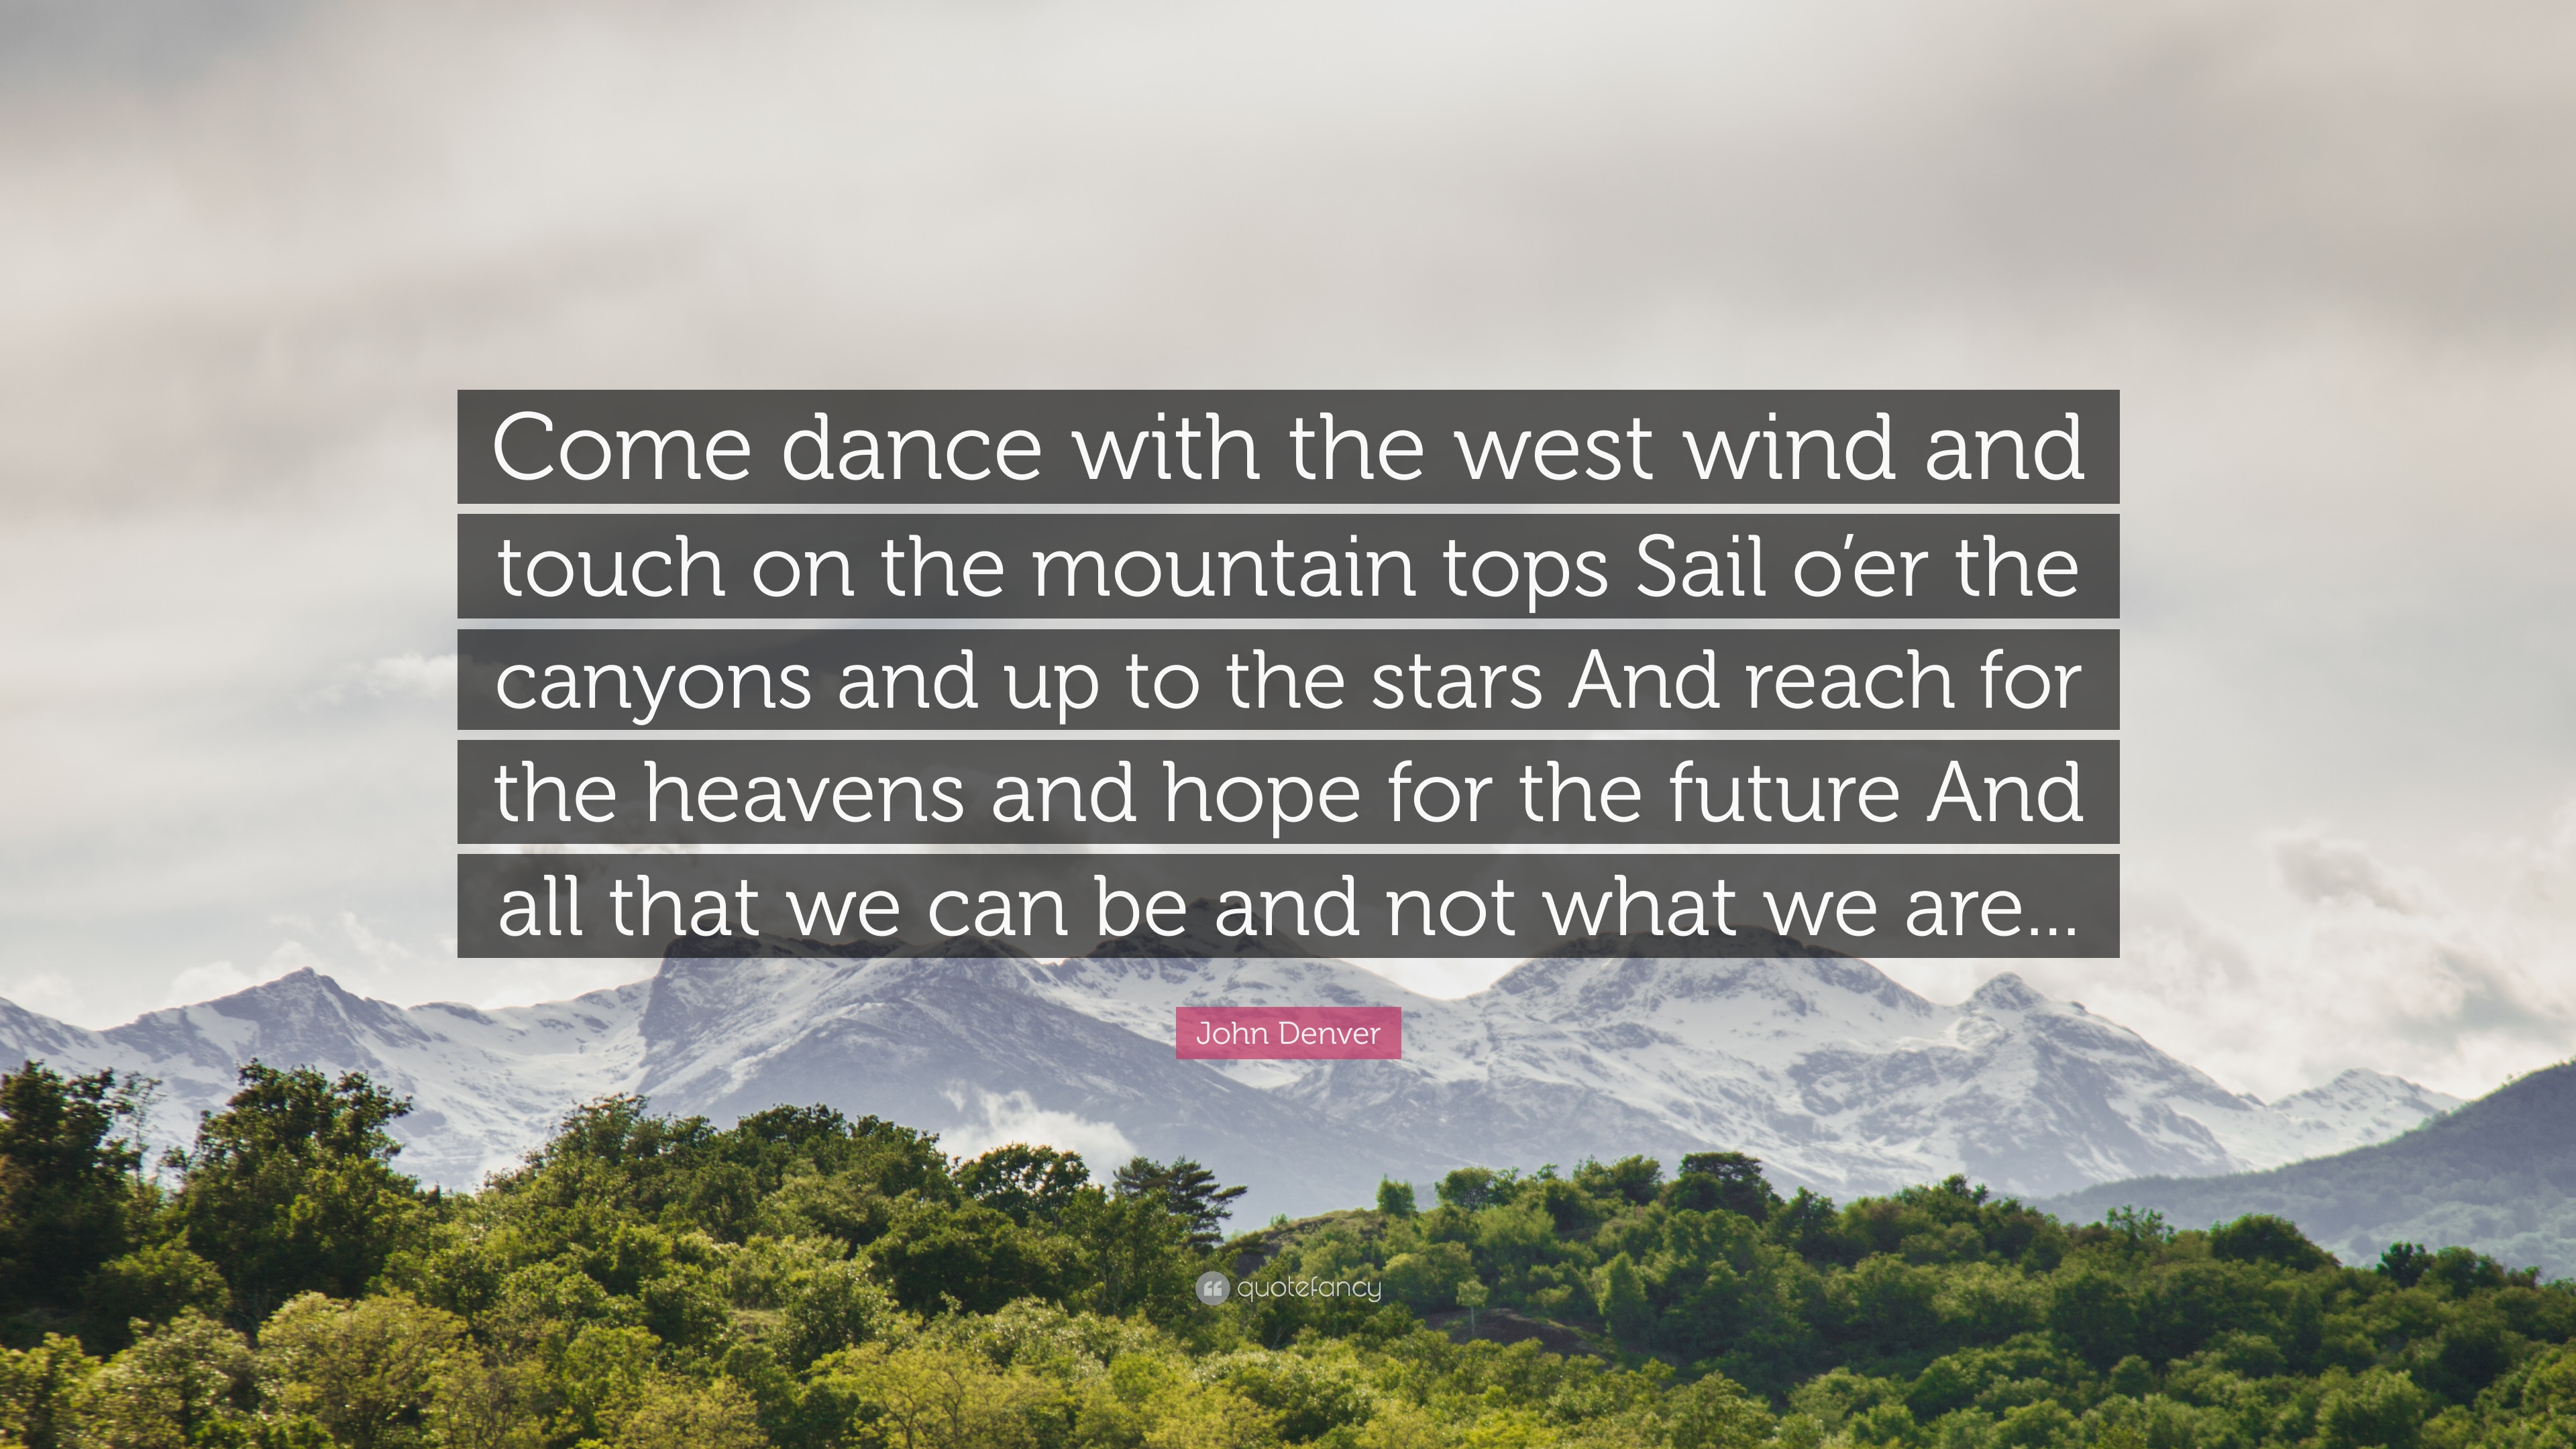 John Denver Quote: “Come dance with the west wind and touch on